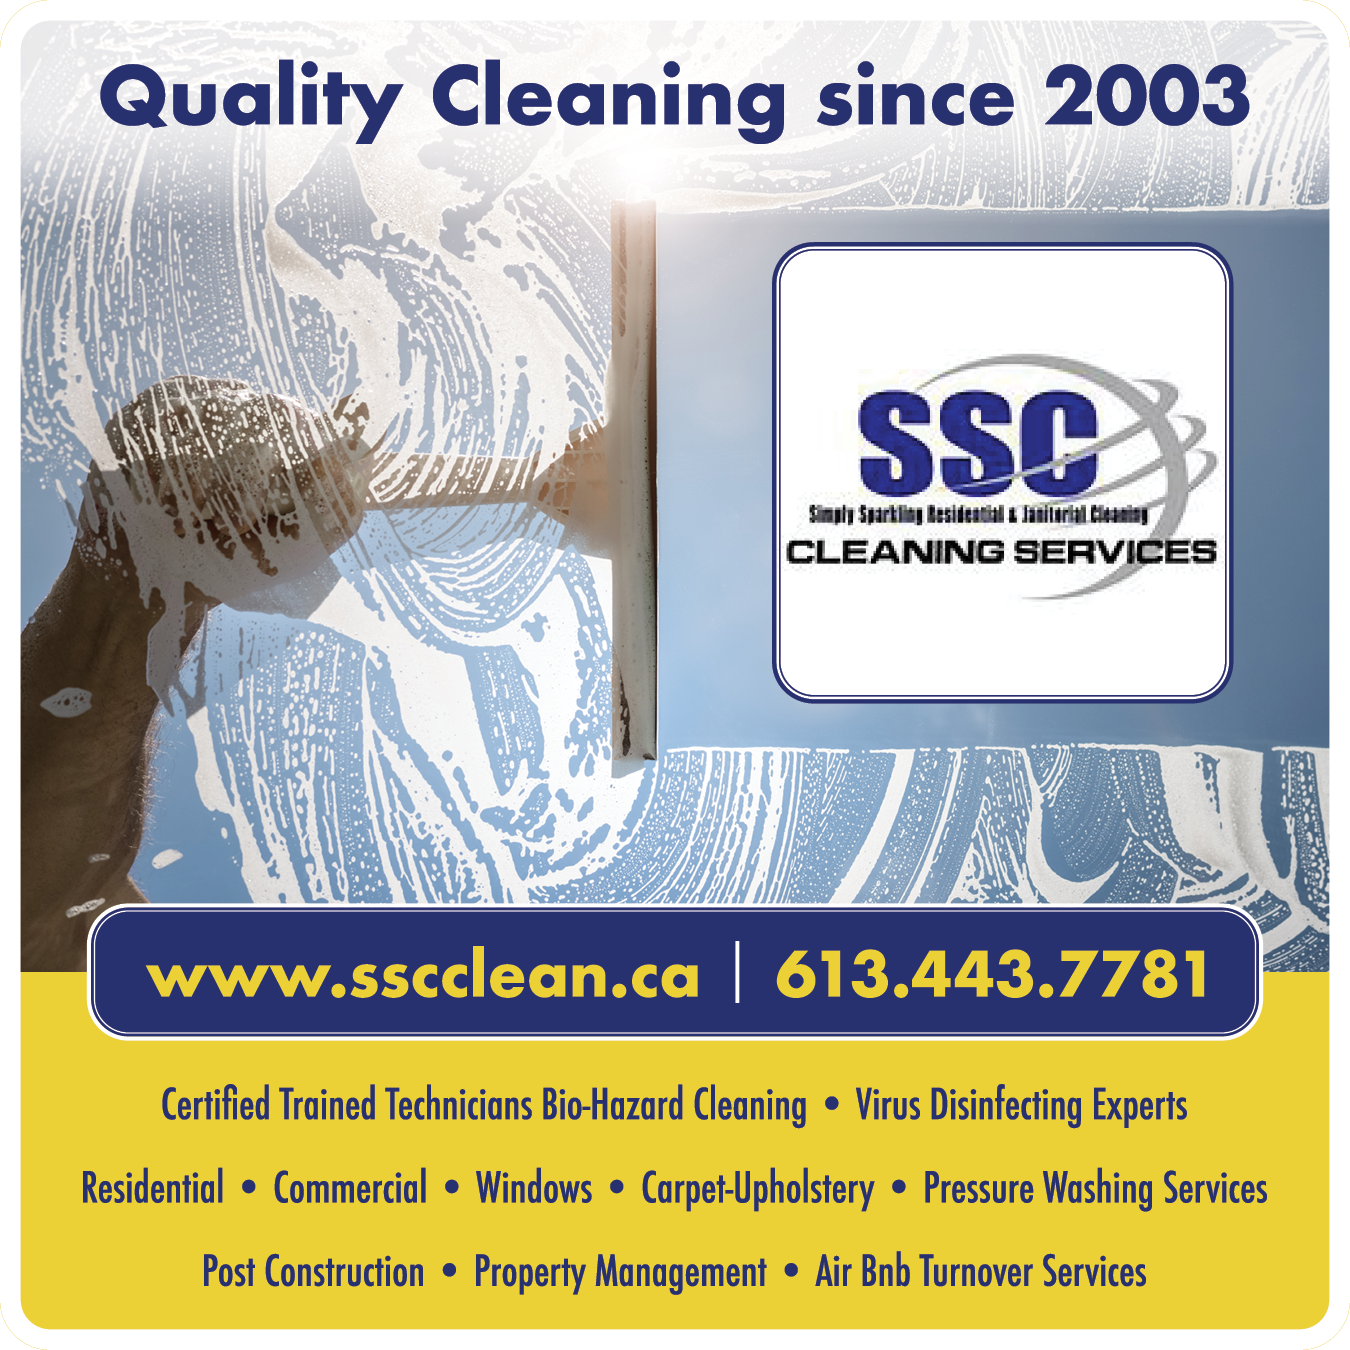 SSC Cleaning Services